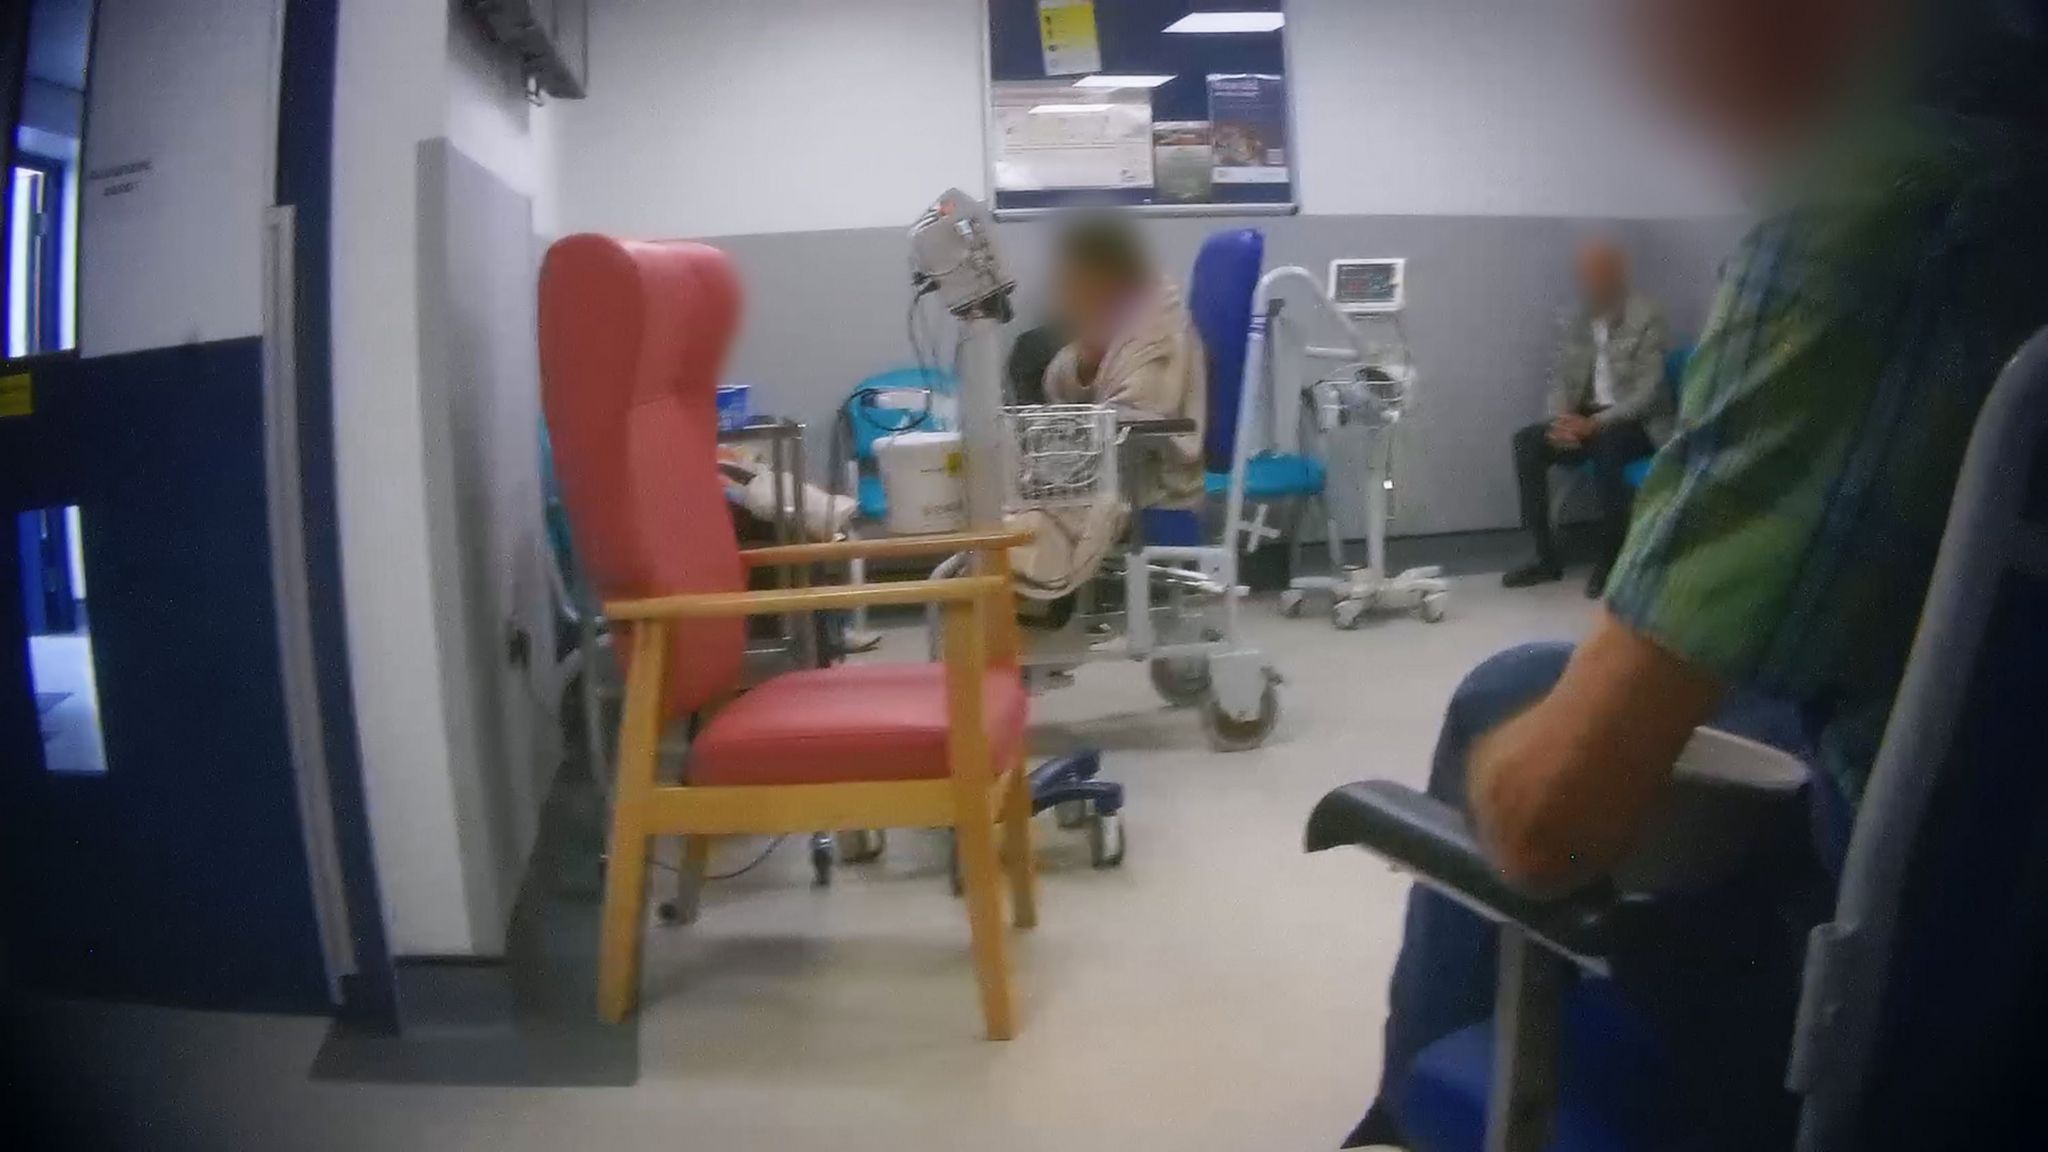 A picture of patients with their faces blurred beoing treated and waiting in corridor areas at the Royal Shrewsbury Hospital